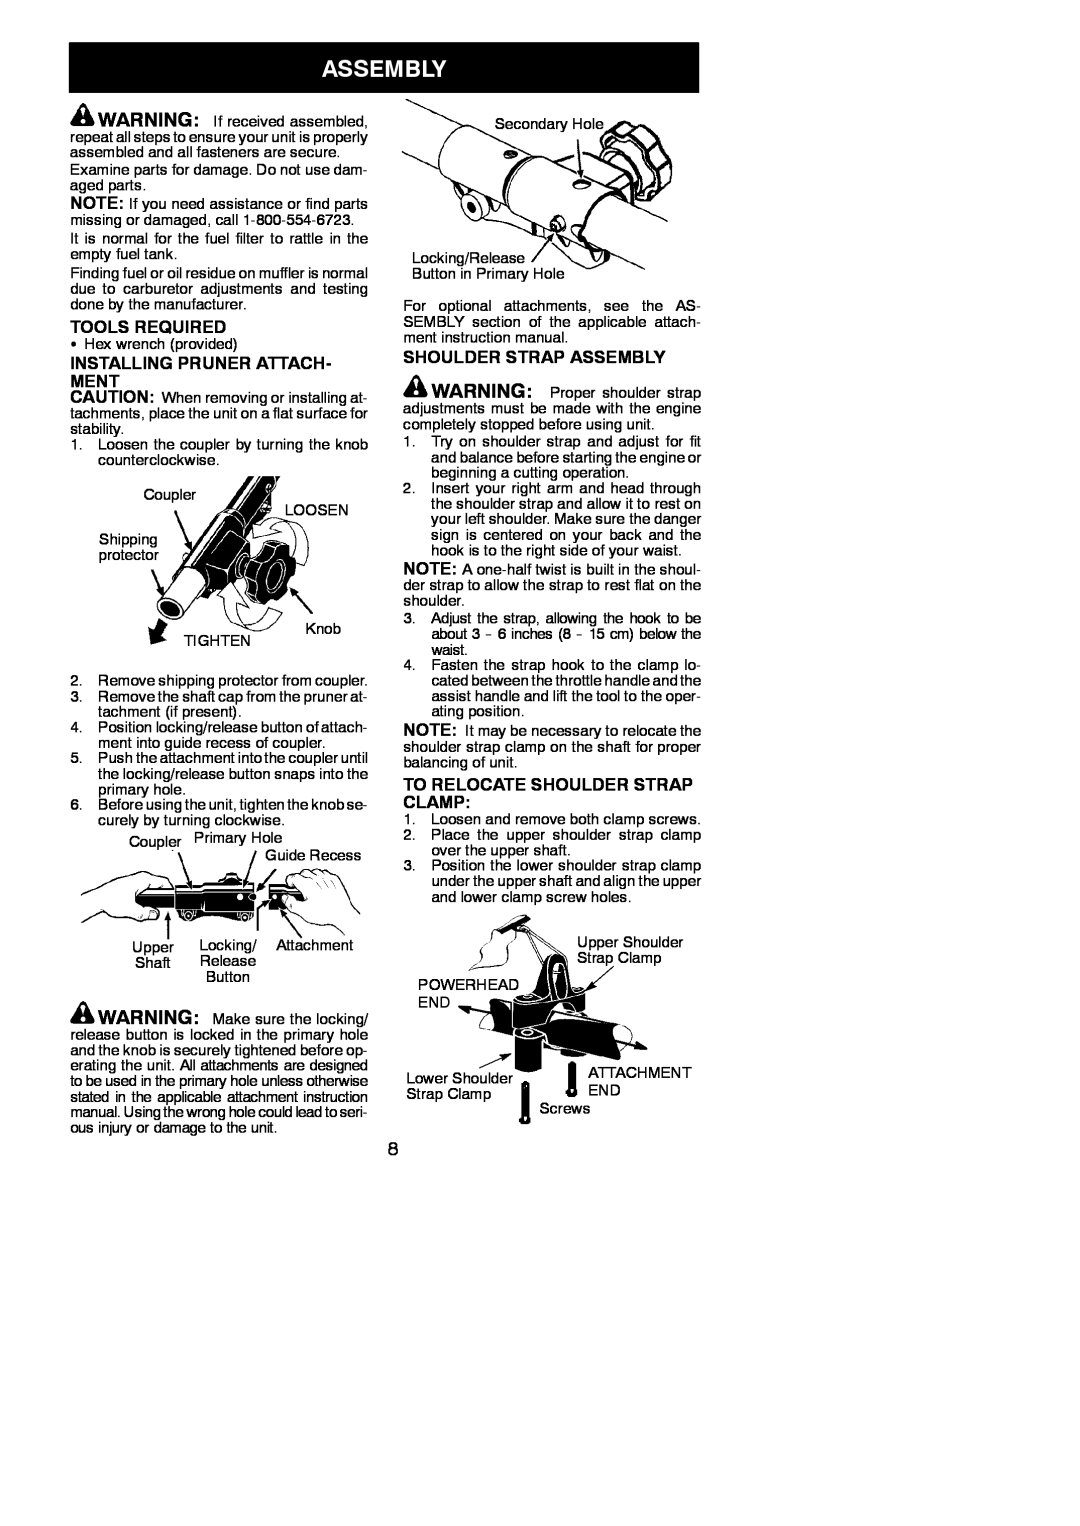 Poulan 545137281 instruction manual Tools Required, Installing Pruner Attach- Ment, Shoulder Strap Assembly 